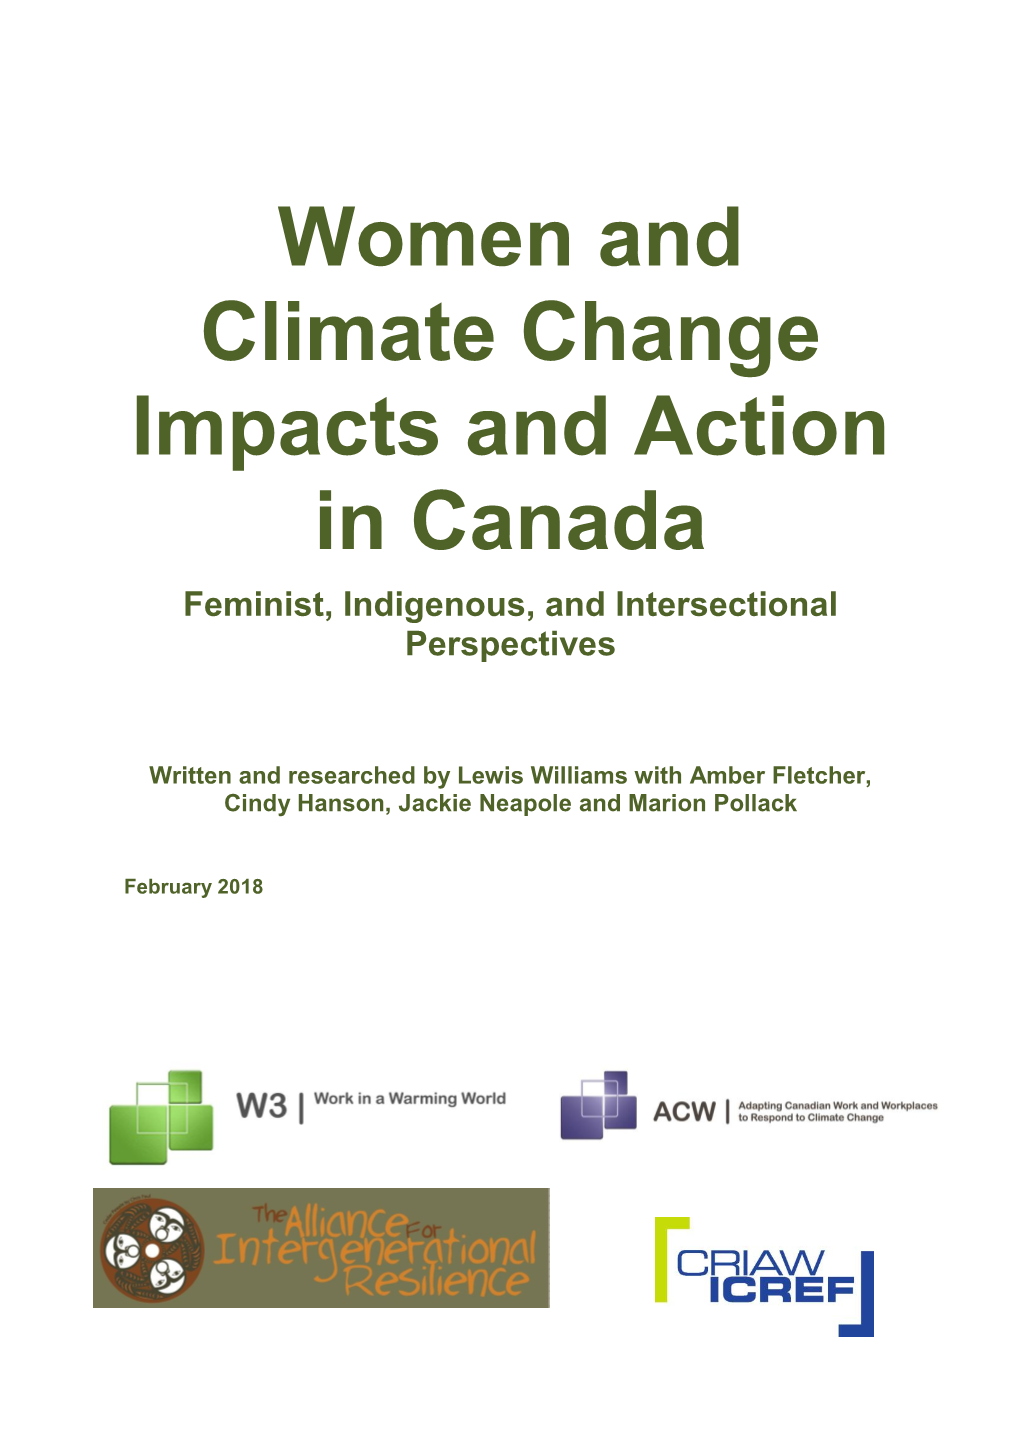 Women and Climate Change Impacts and Action in Canada Feminist, Indigenous, and Intersectional Perspectives